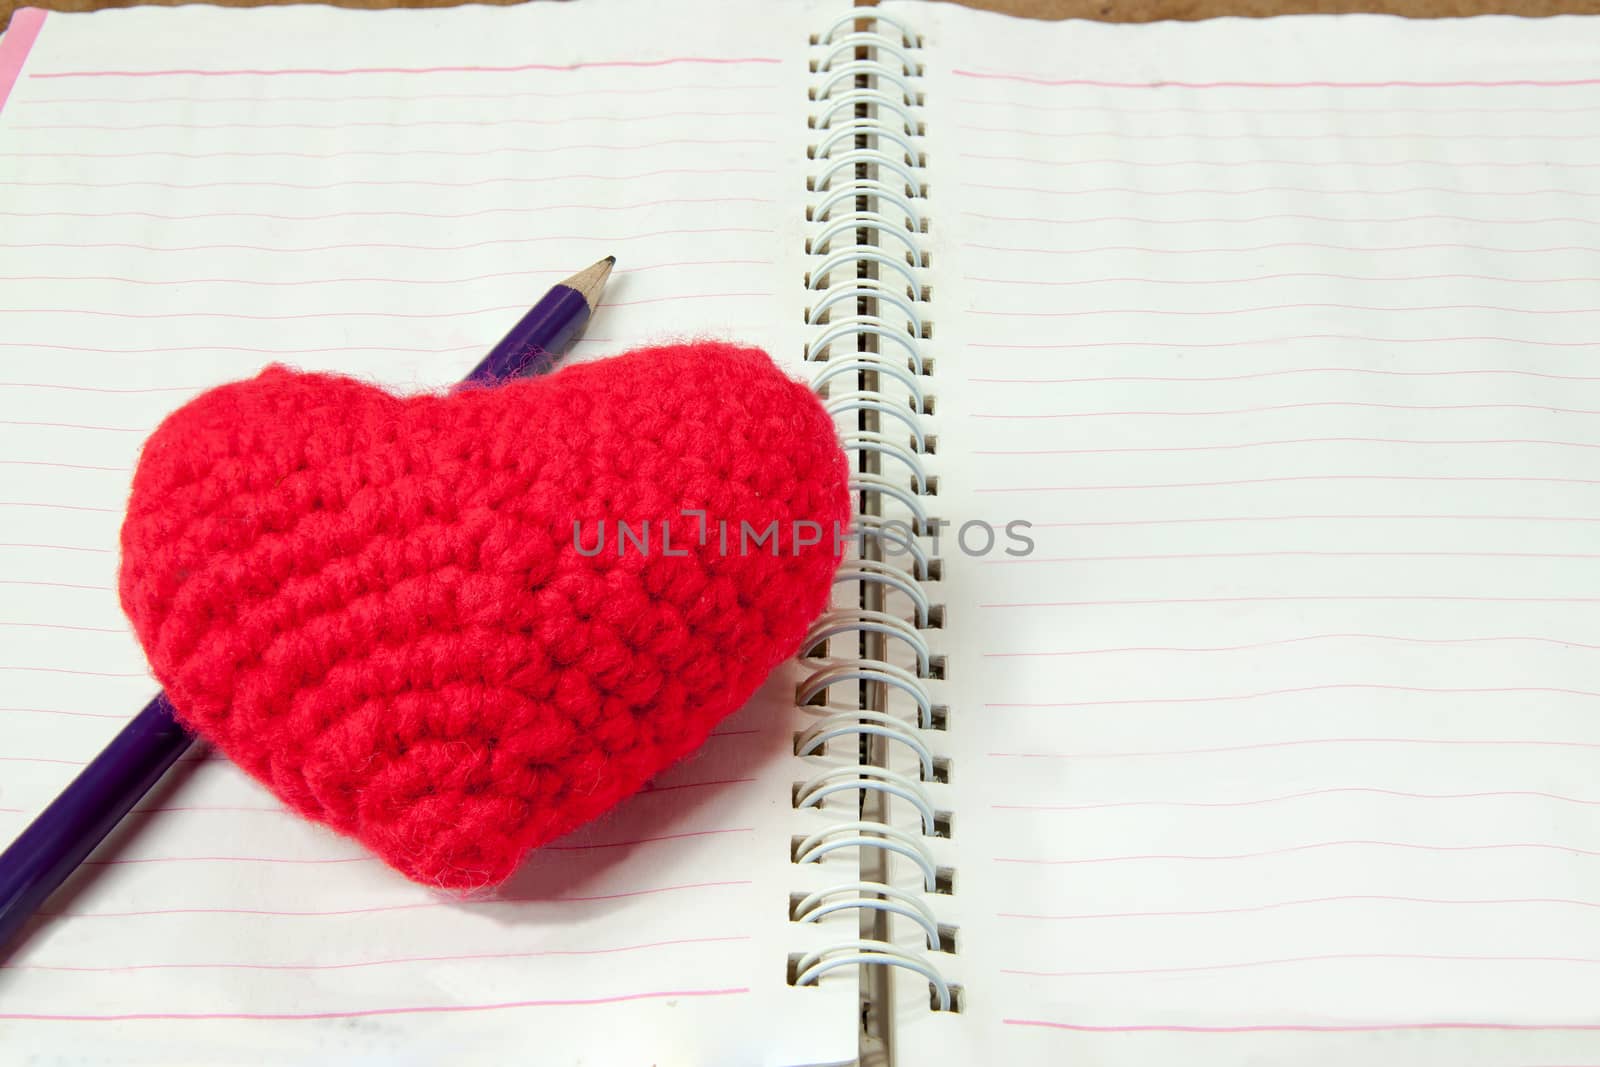 Crochet heart red color and pencil on note book